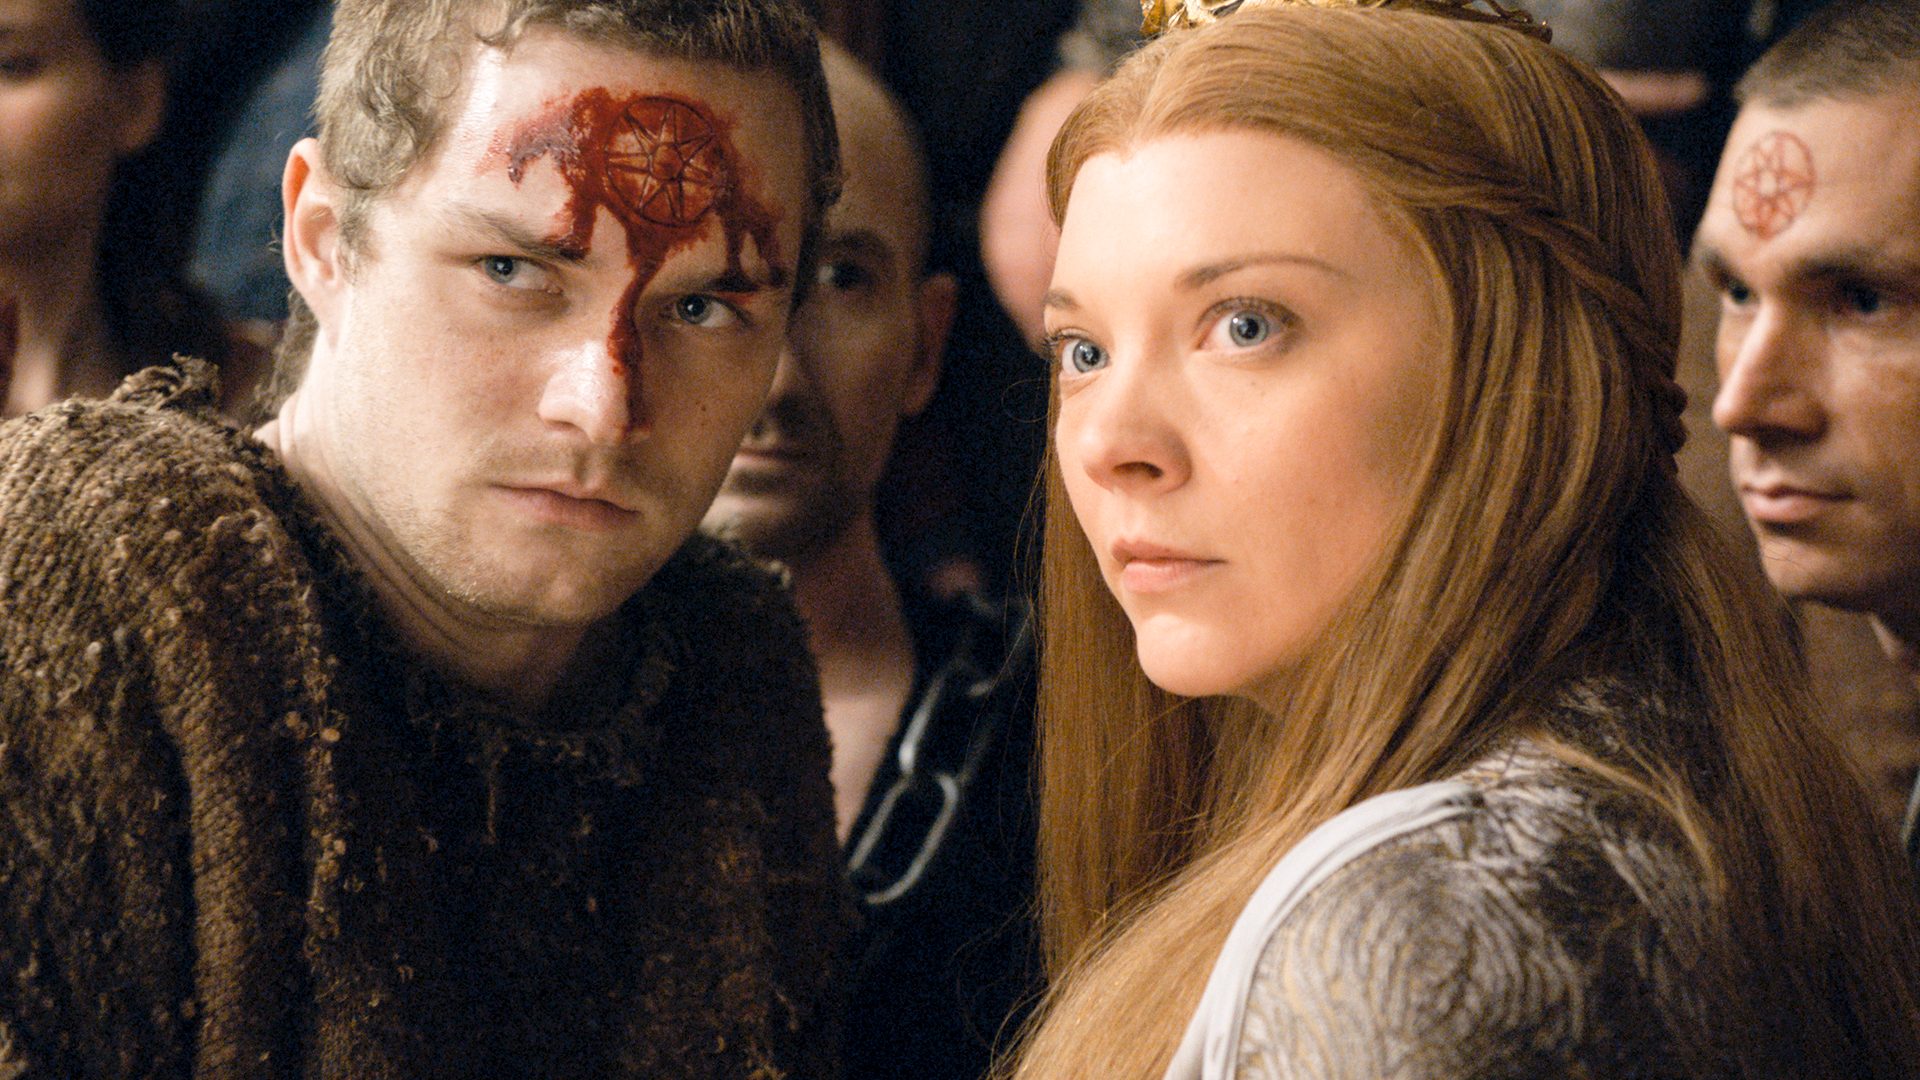 MARGAERY TYRELL. 'Game of Thrones' actress Natalie Dormer talks about season 6's shocking character death. Photo courtesy of HBO Asia 